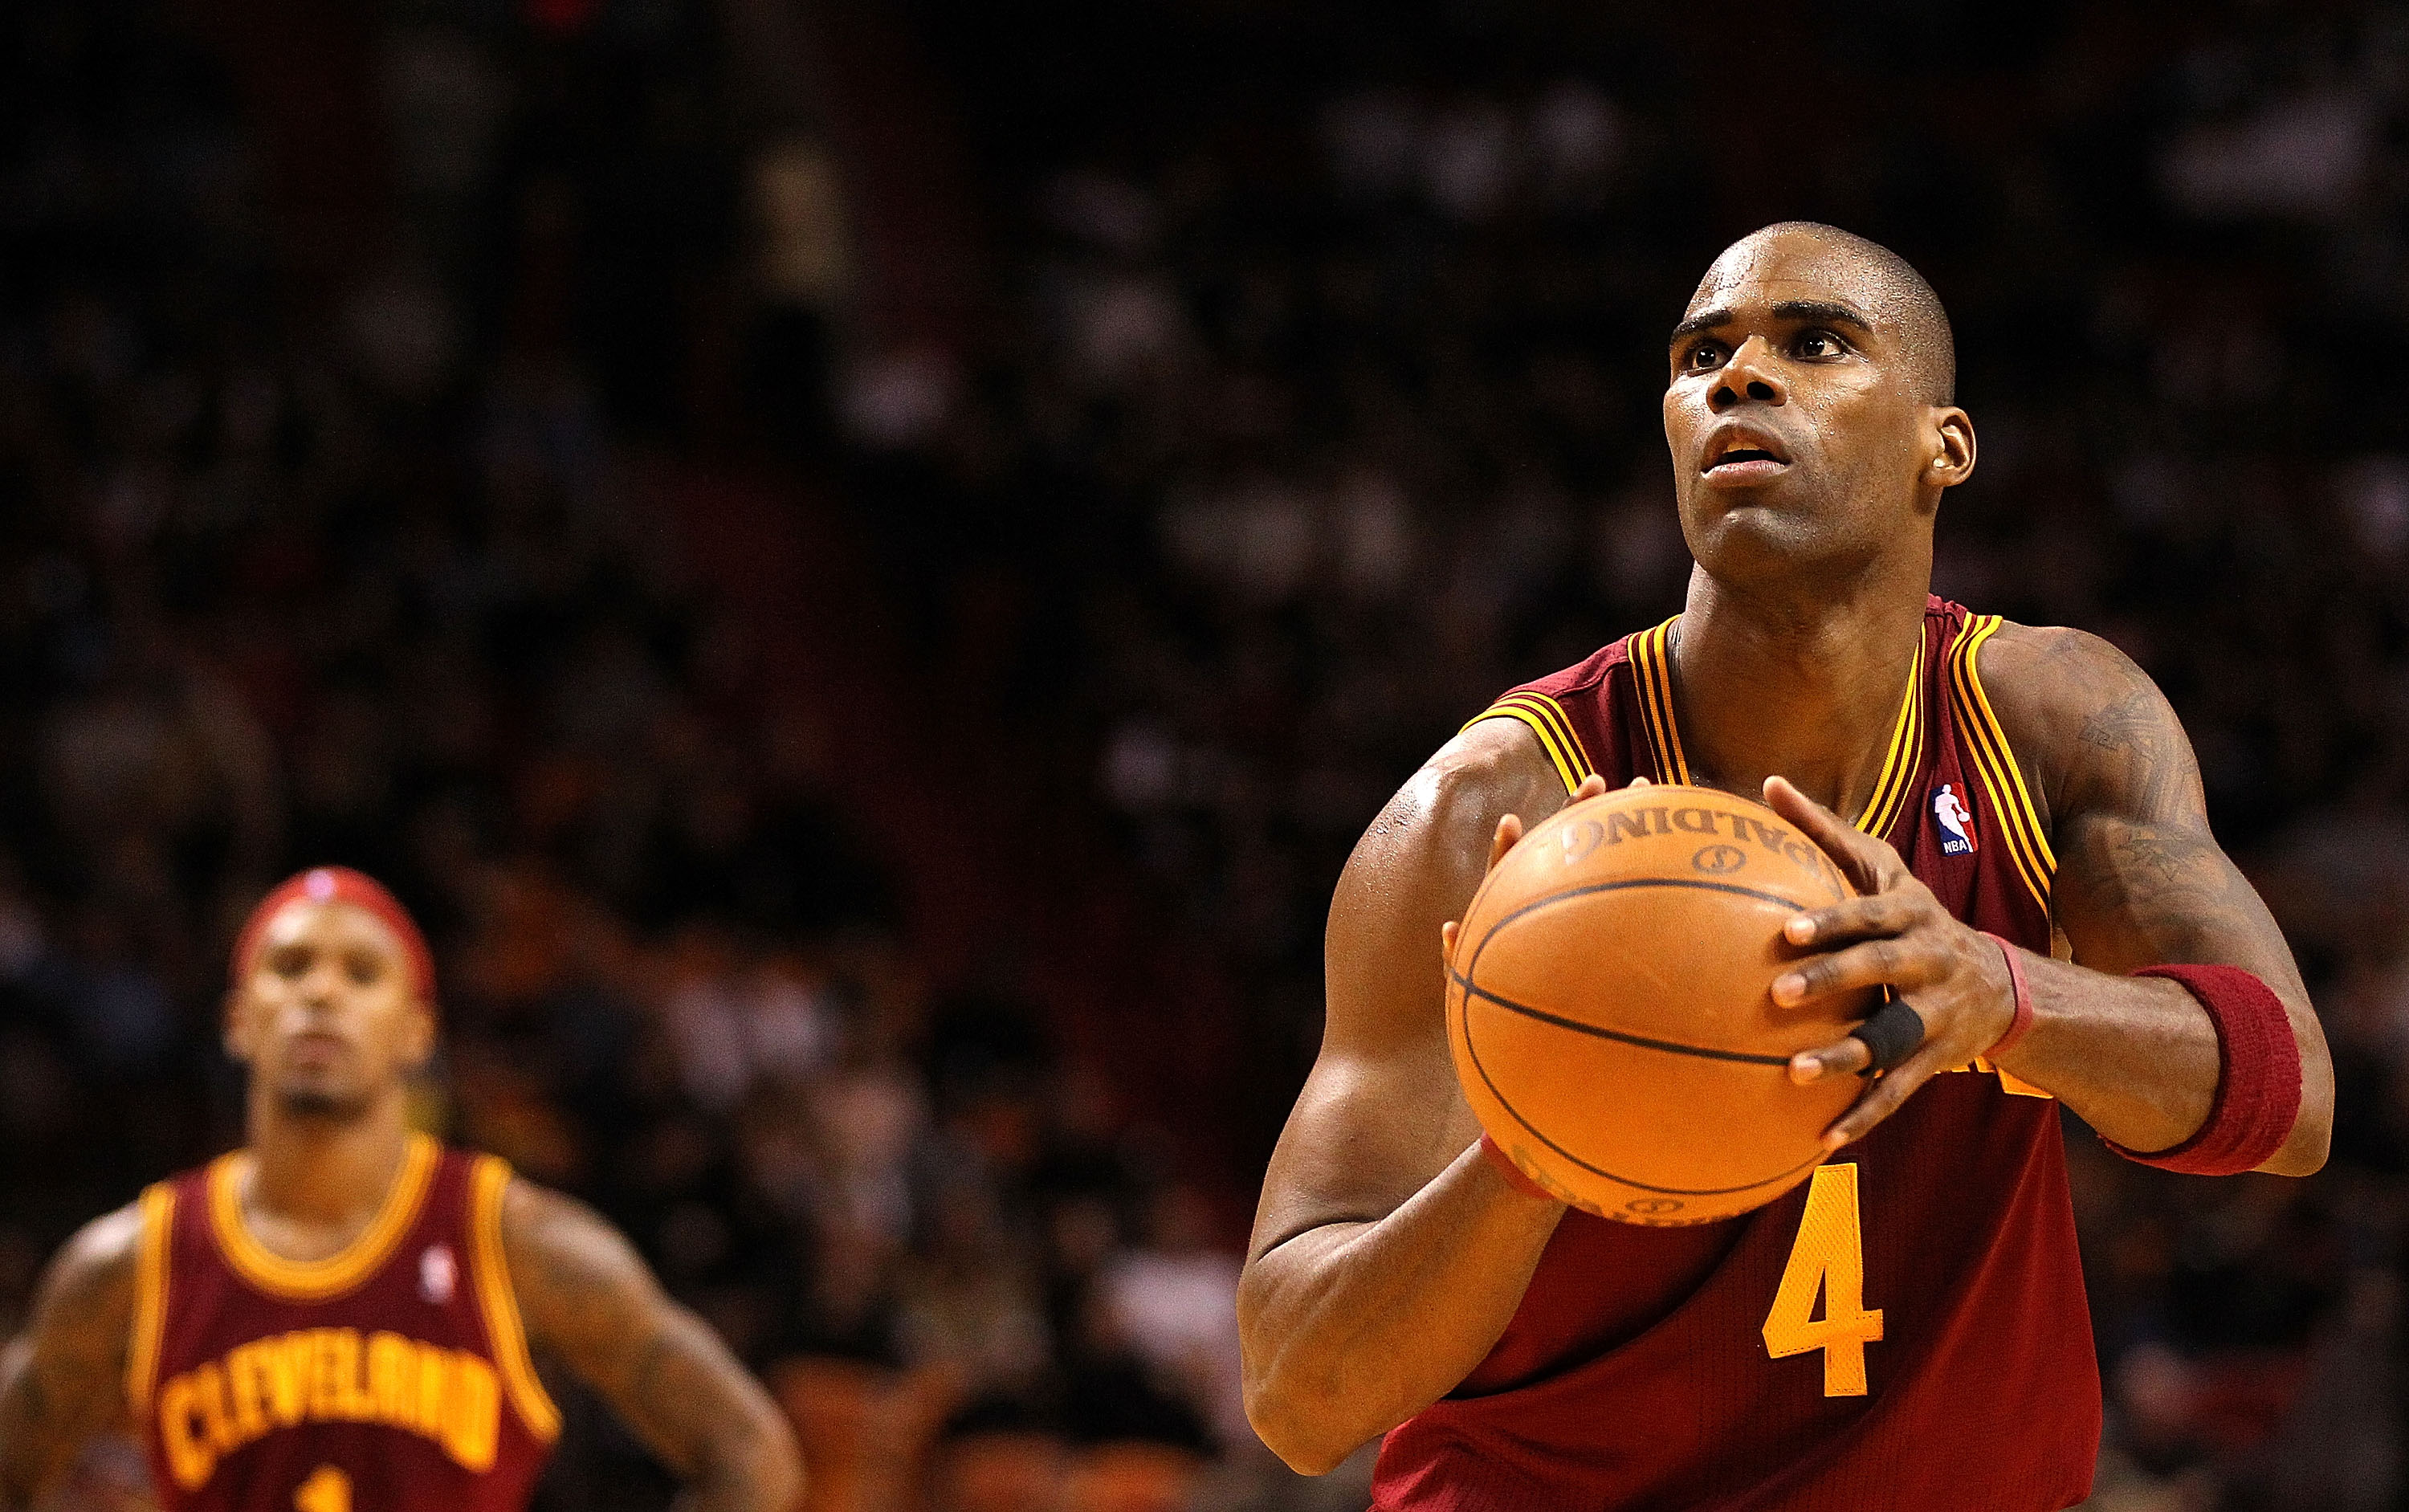 MIAMI, FL - DECEMBER 15:  Antawn Jamison #4  of the Cleveland Cavaliers shoots a free throw during a game against the Miami Heat at American Airlines Arena on December 15, 2010 in Miami, Florida. NOTE TO USER: User expressly acknowledges and agrees that,